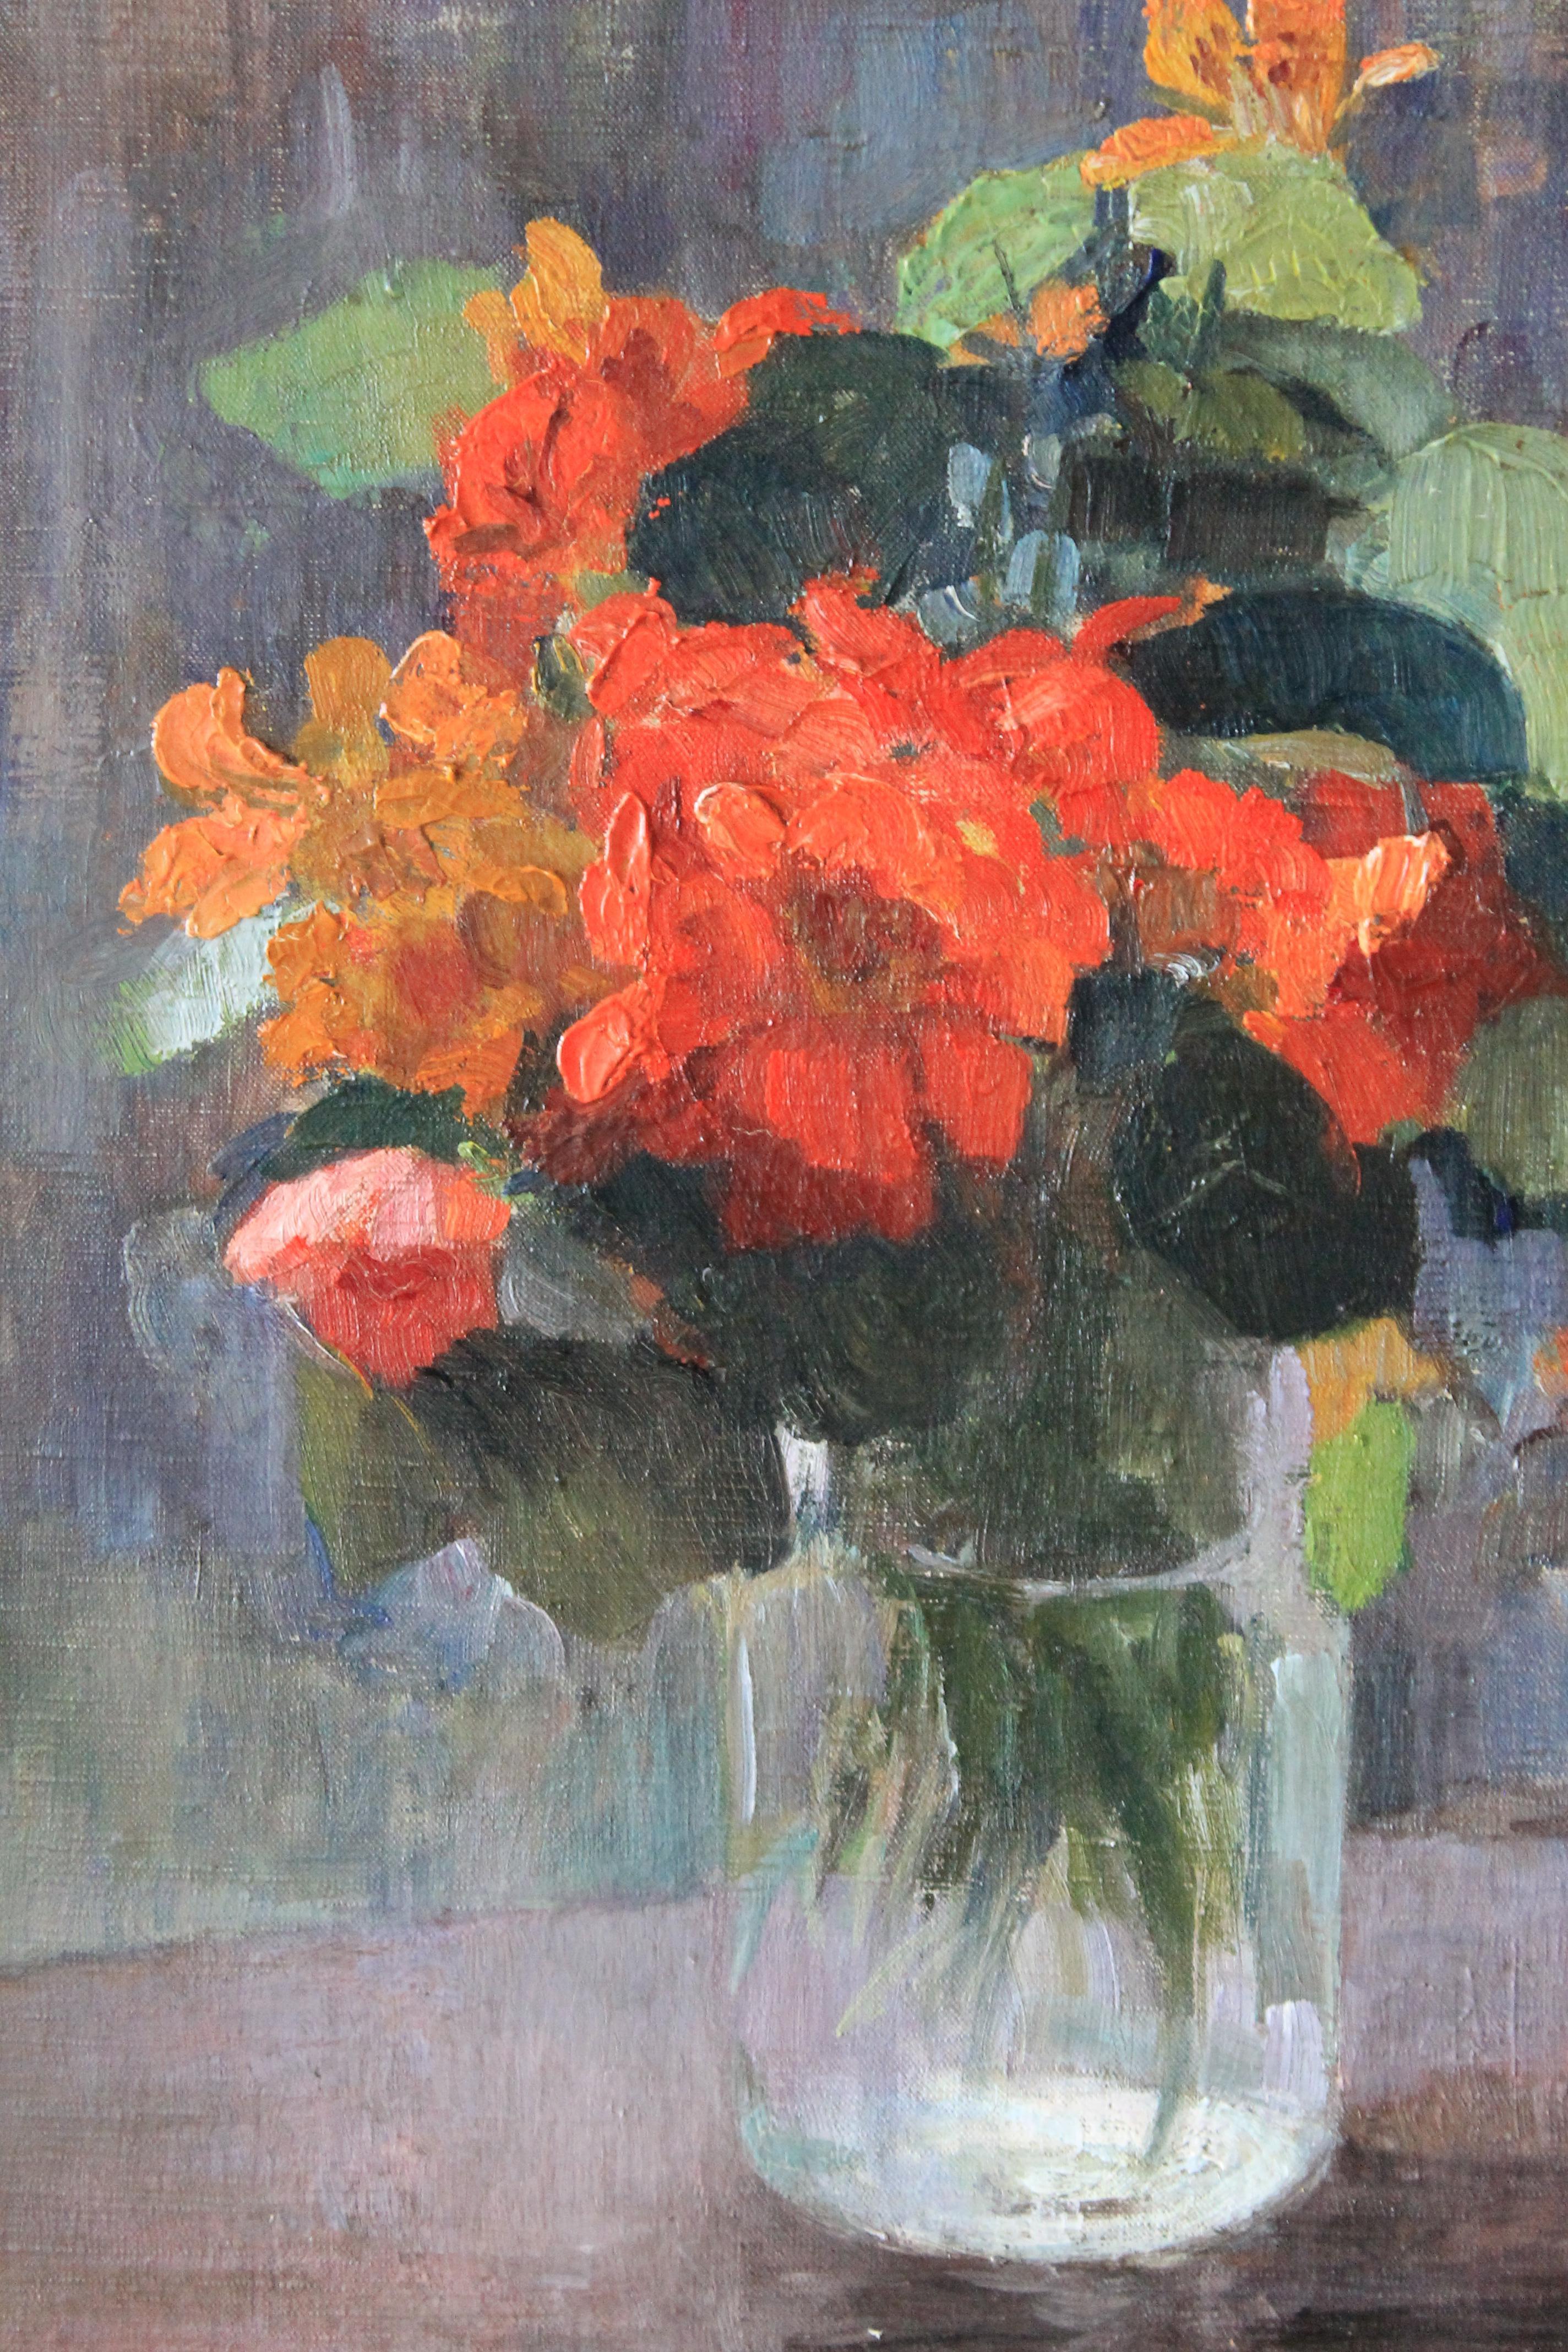 Floral oil painting, floral still life, flower still life, vintage floral vase - Painting by sylvia gardette